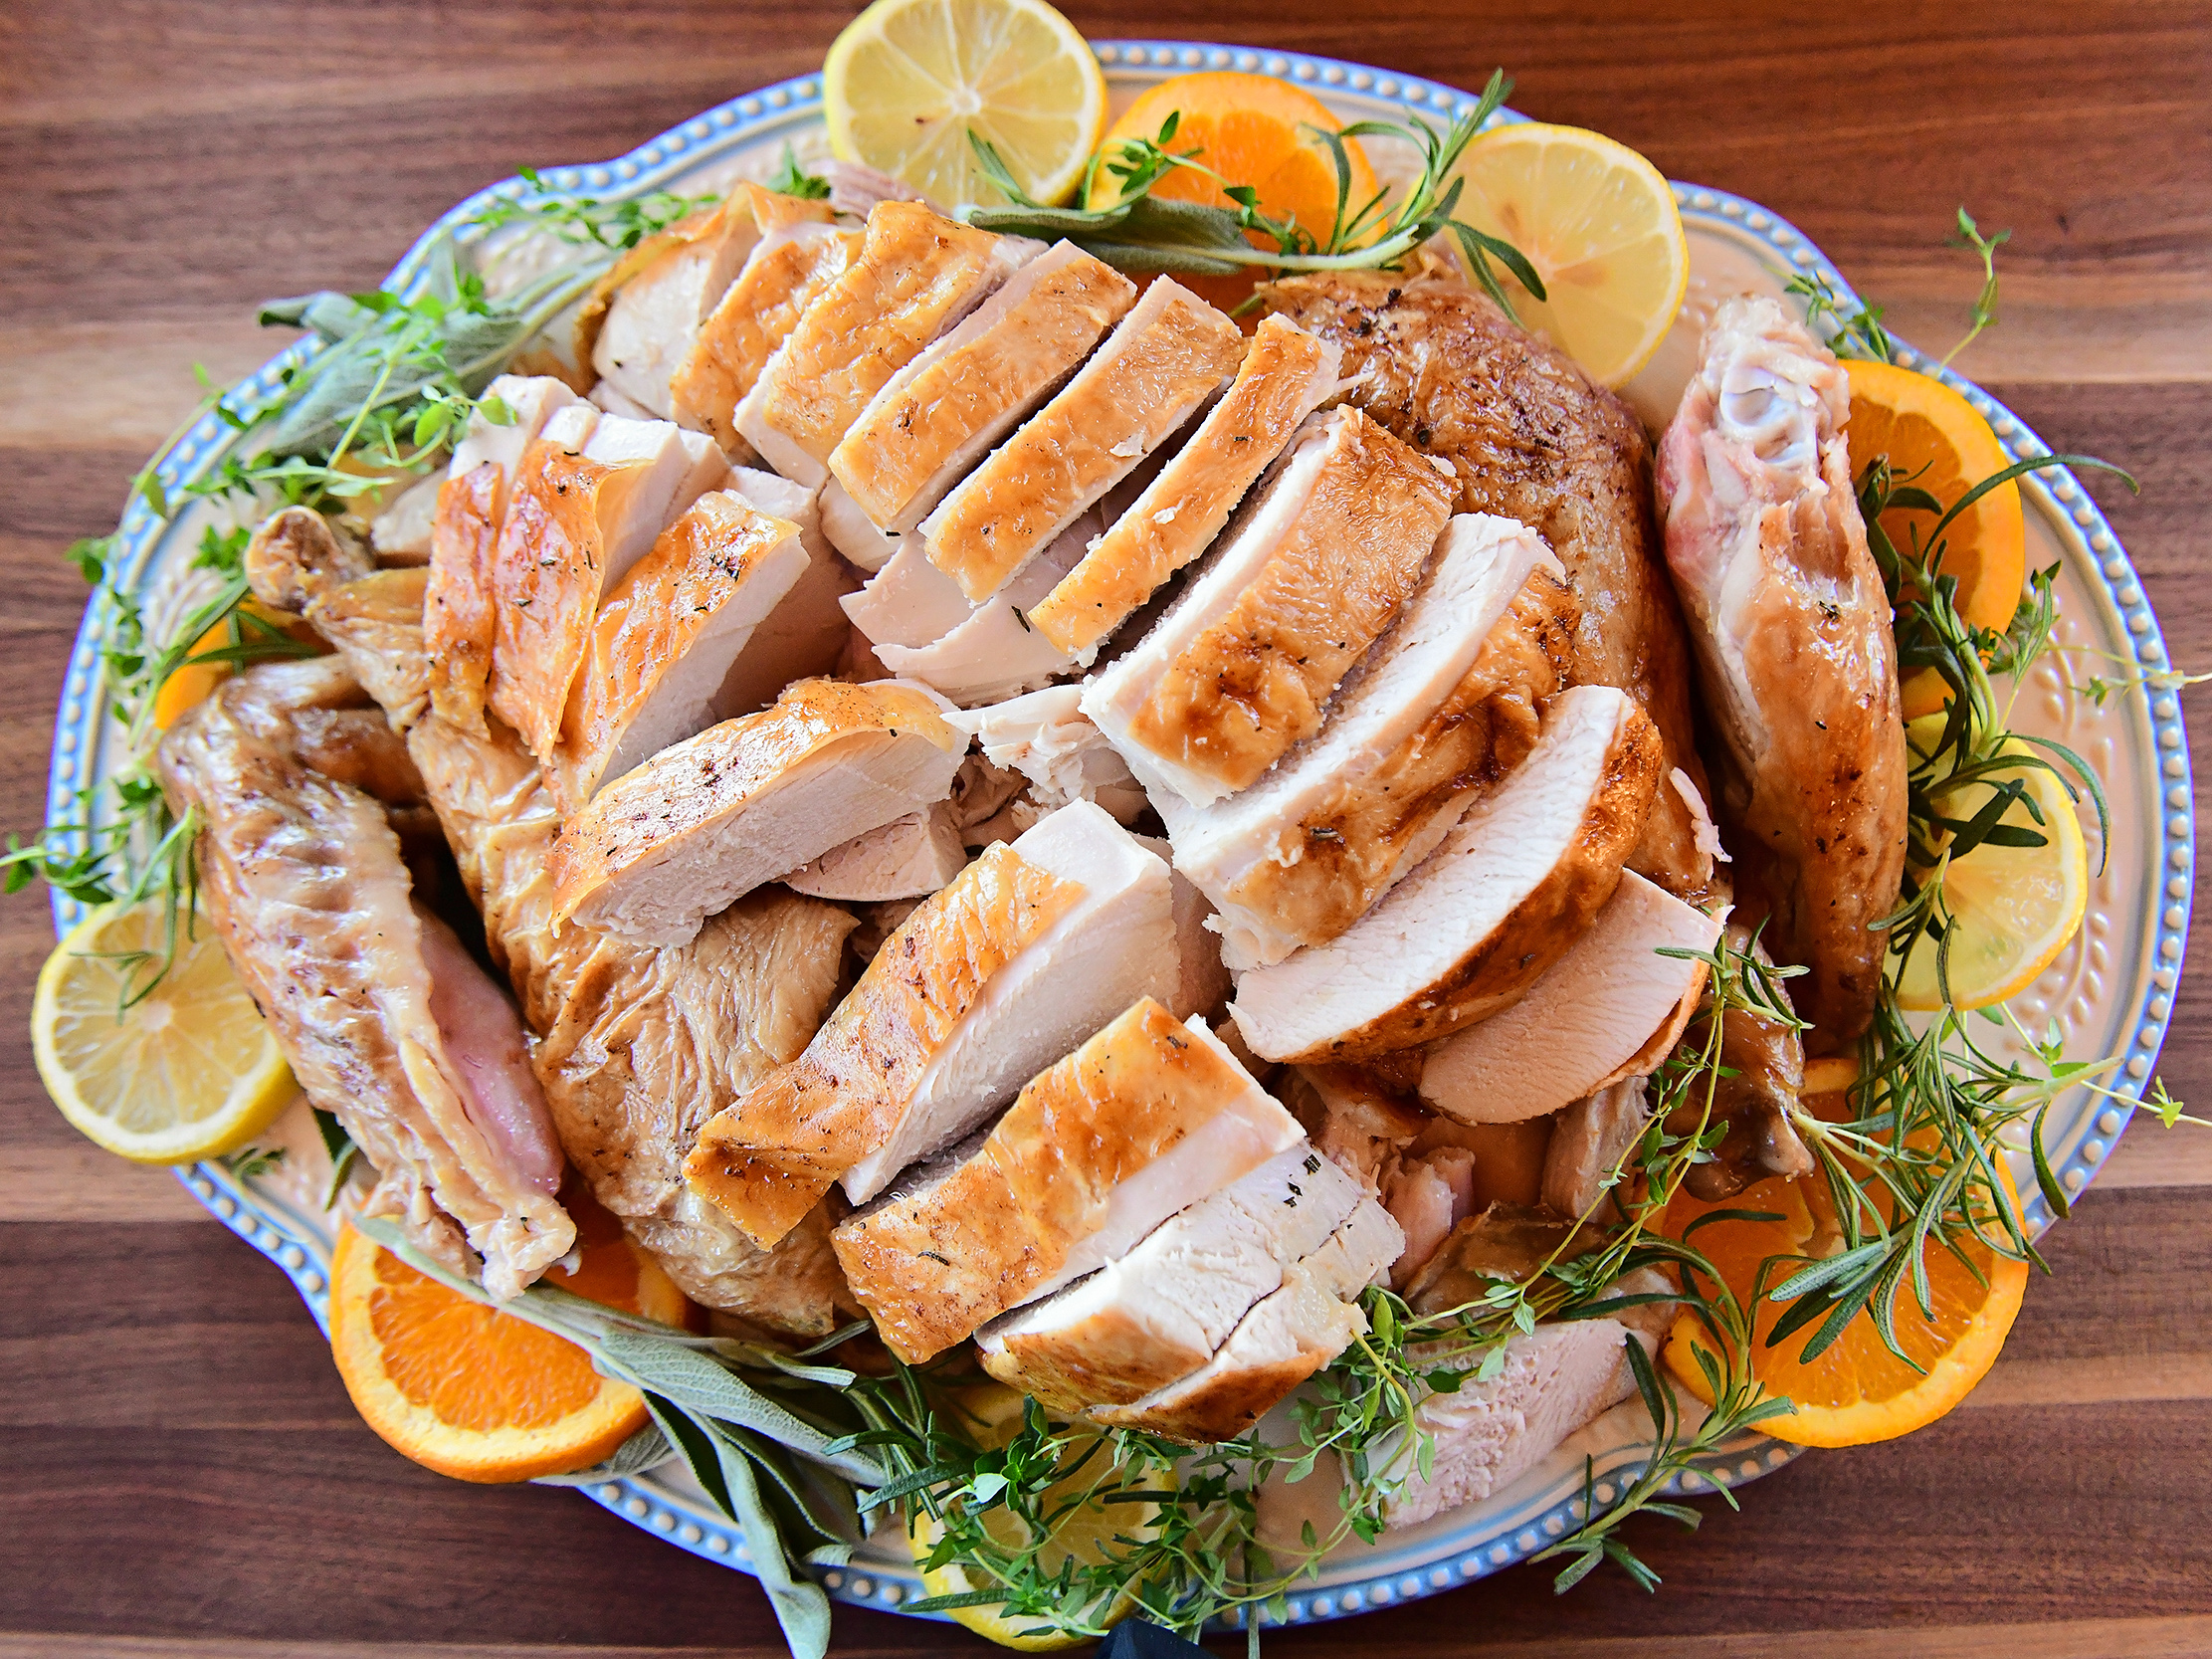 Juicy Thanksgiving Turkey Recipe - Simply Home Cooked